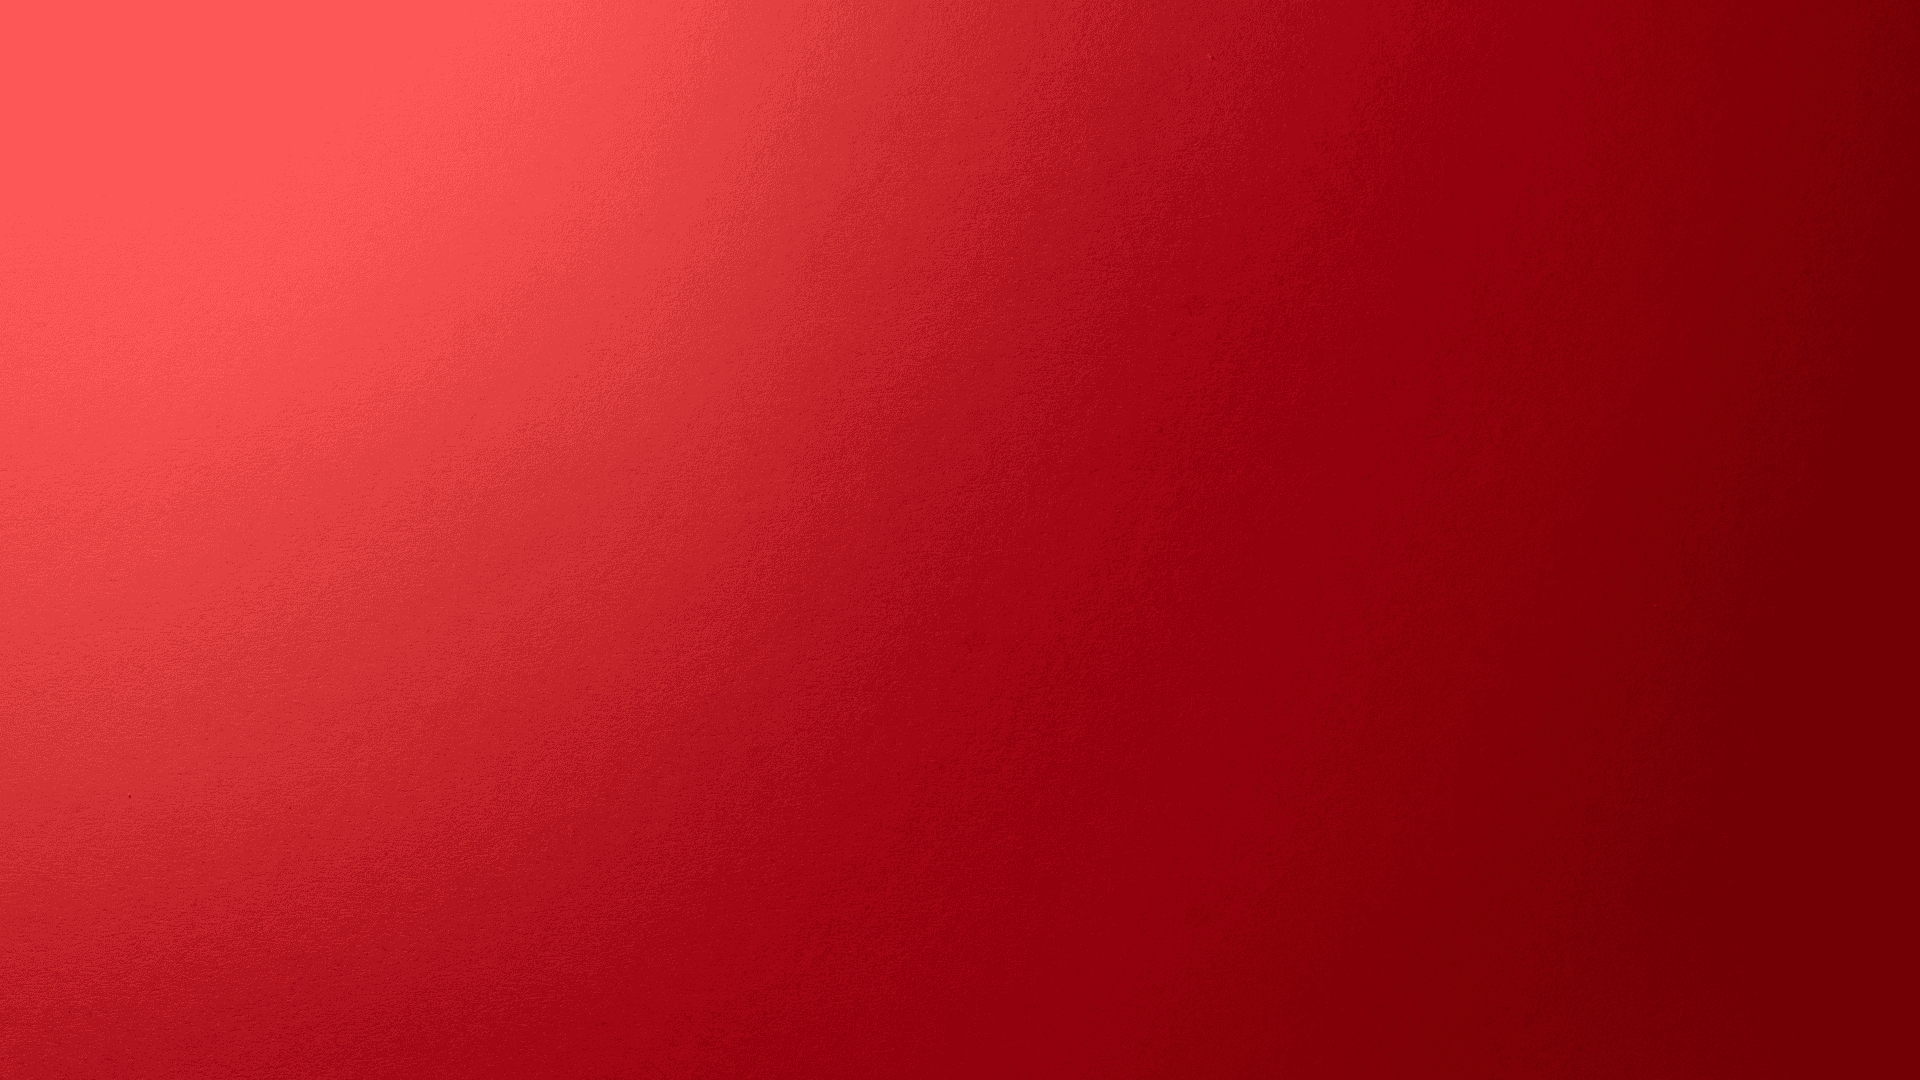 Plain red wallpaper for any style space